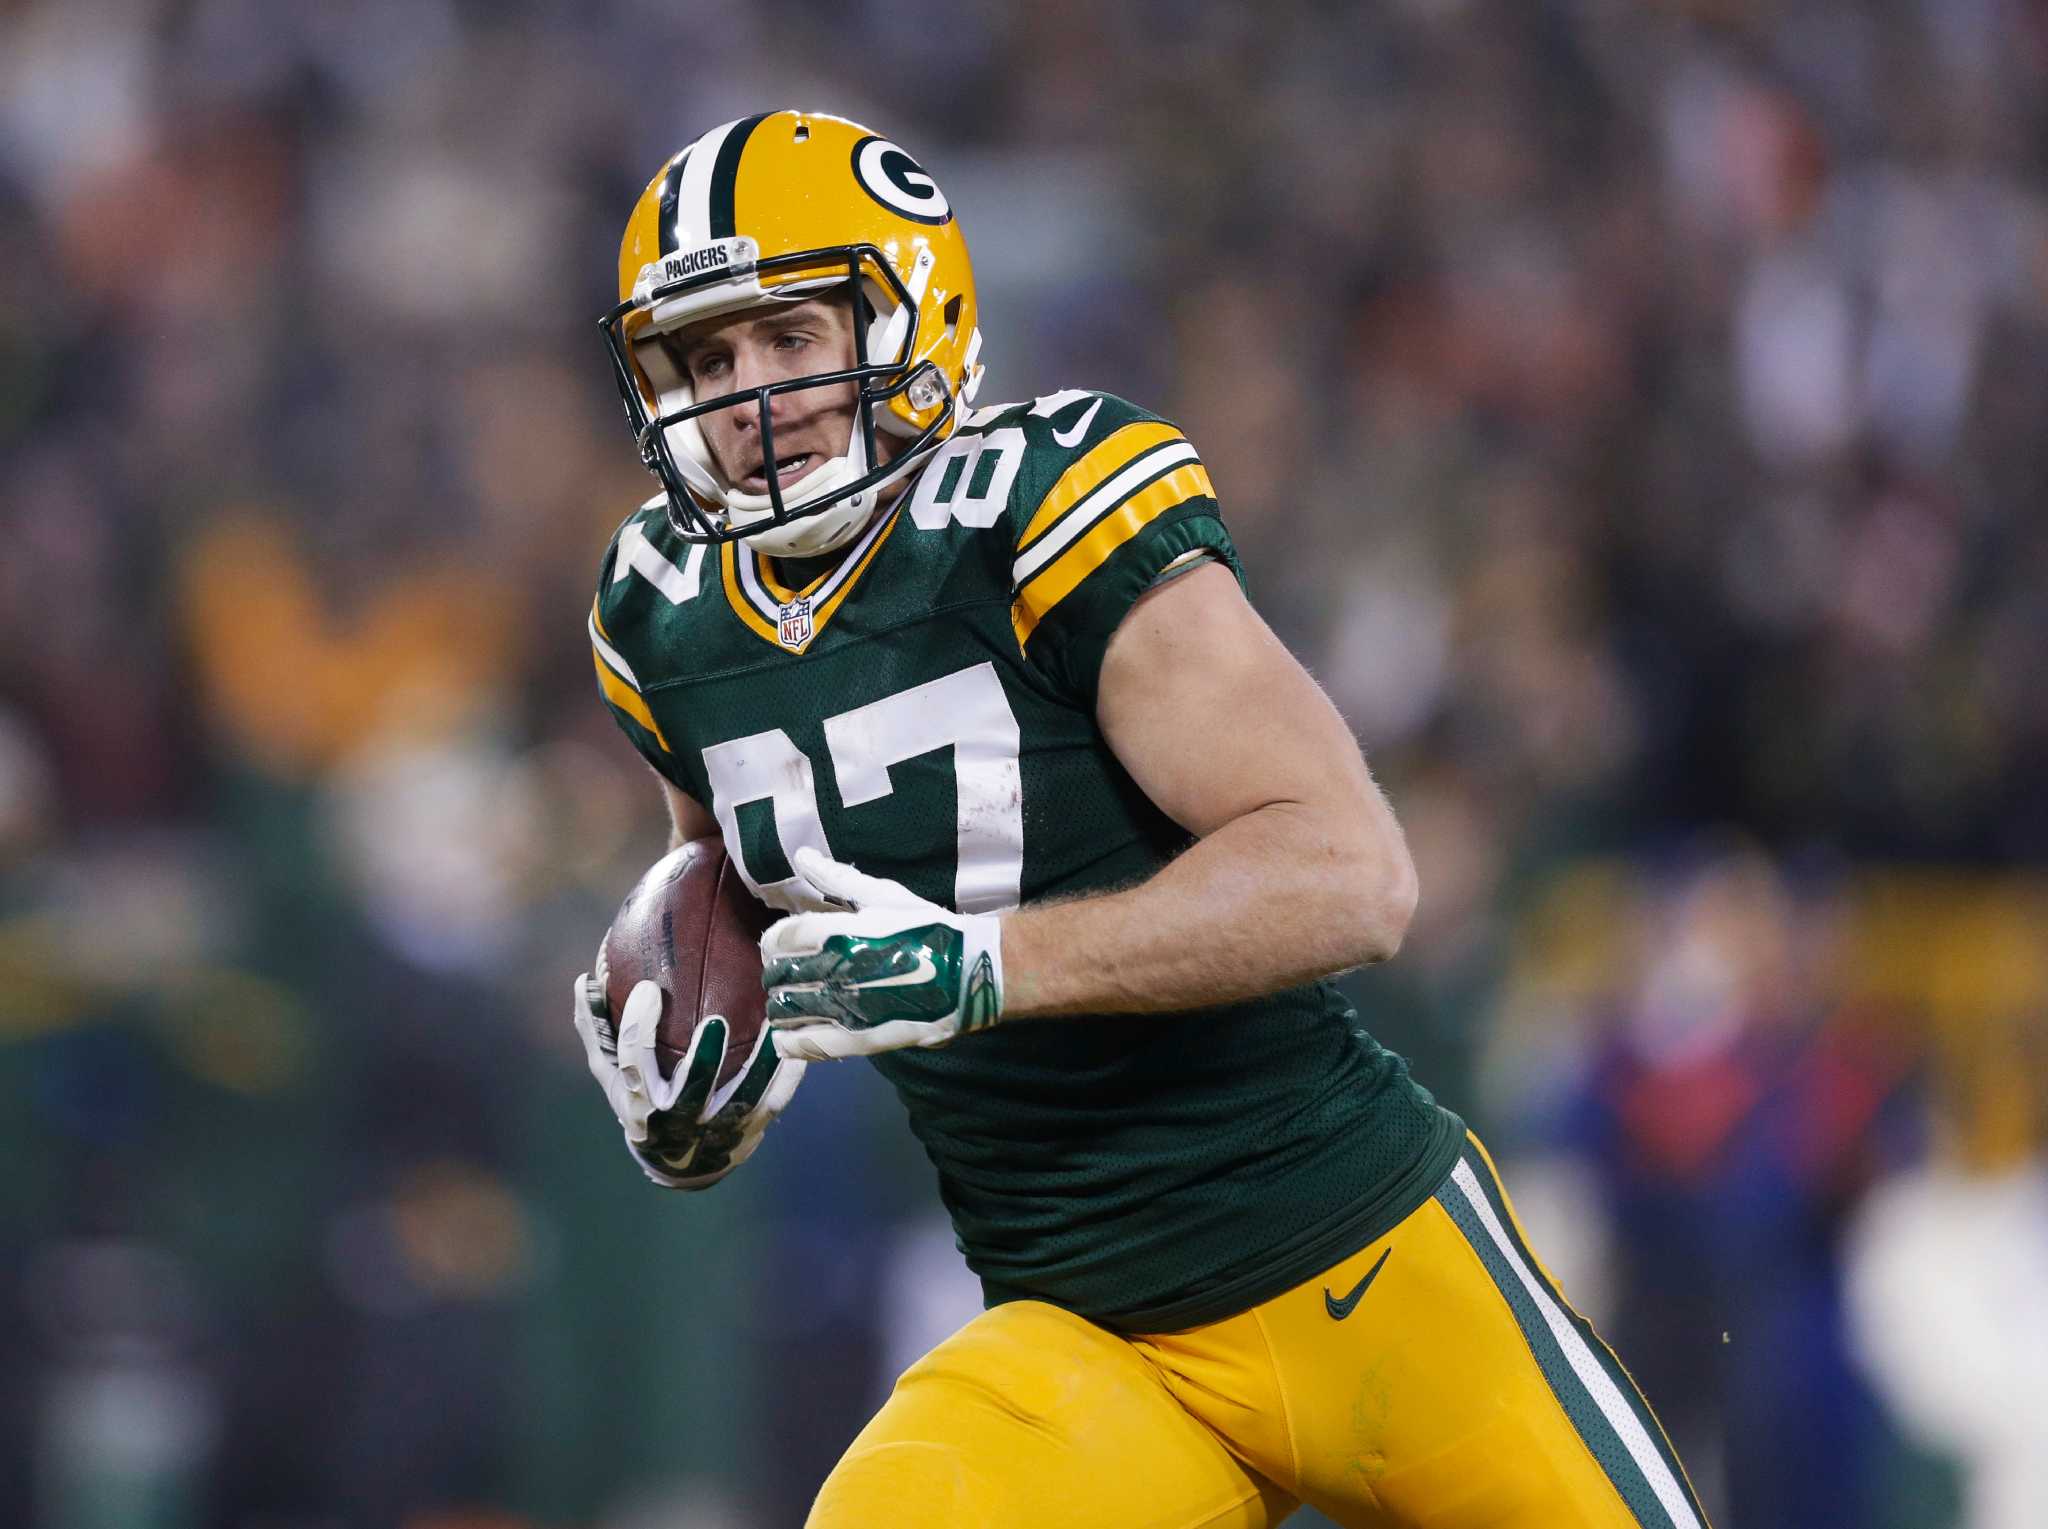 Packers likely to be without leading receiver Jordy Nelson against Cowboys.